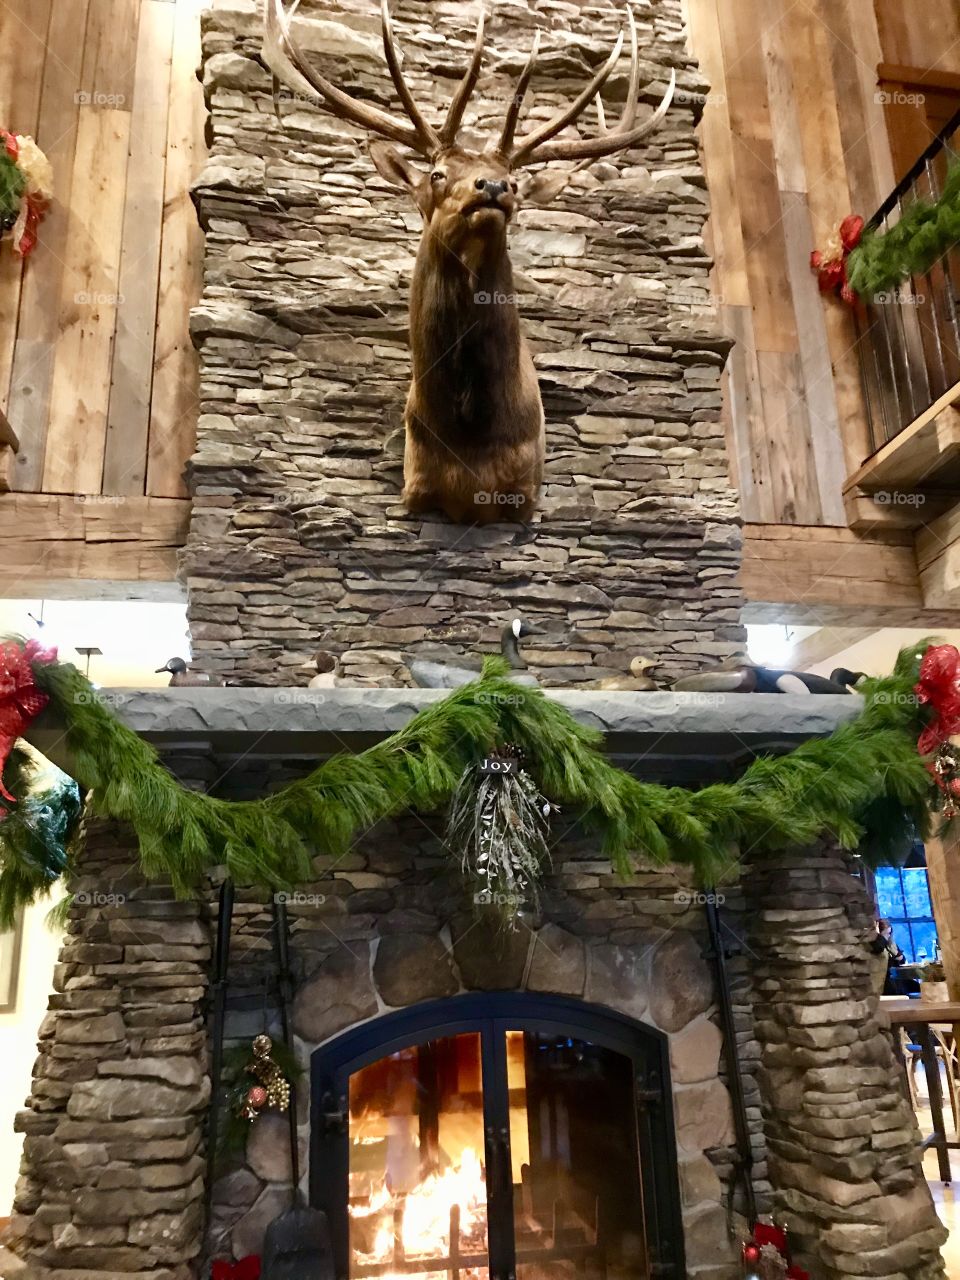 Grand fire place at Christmas time 